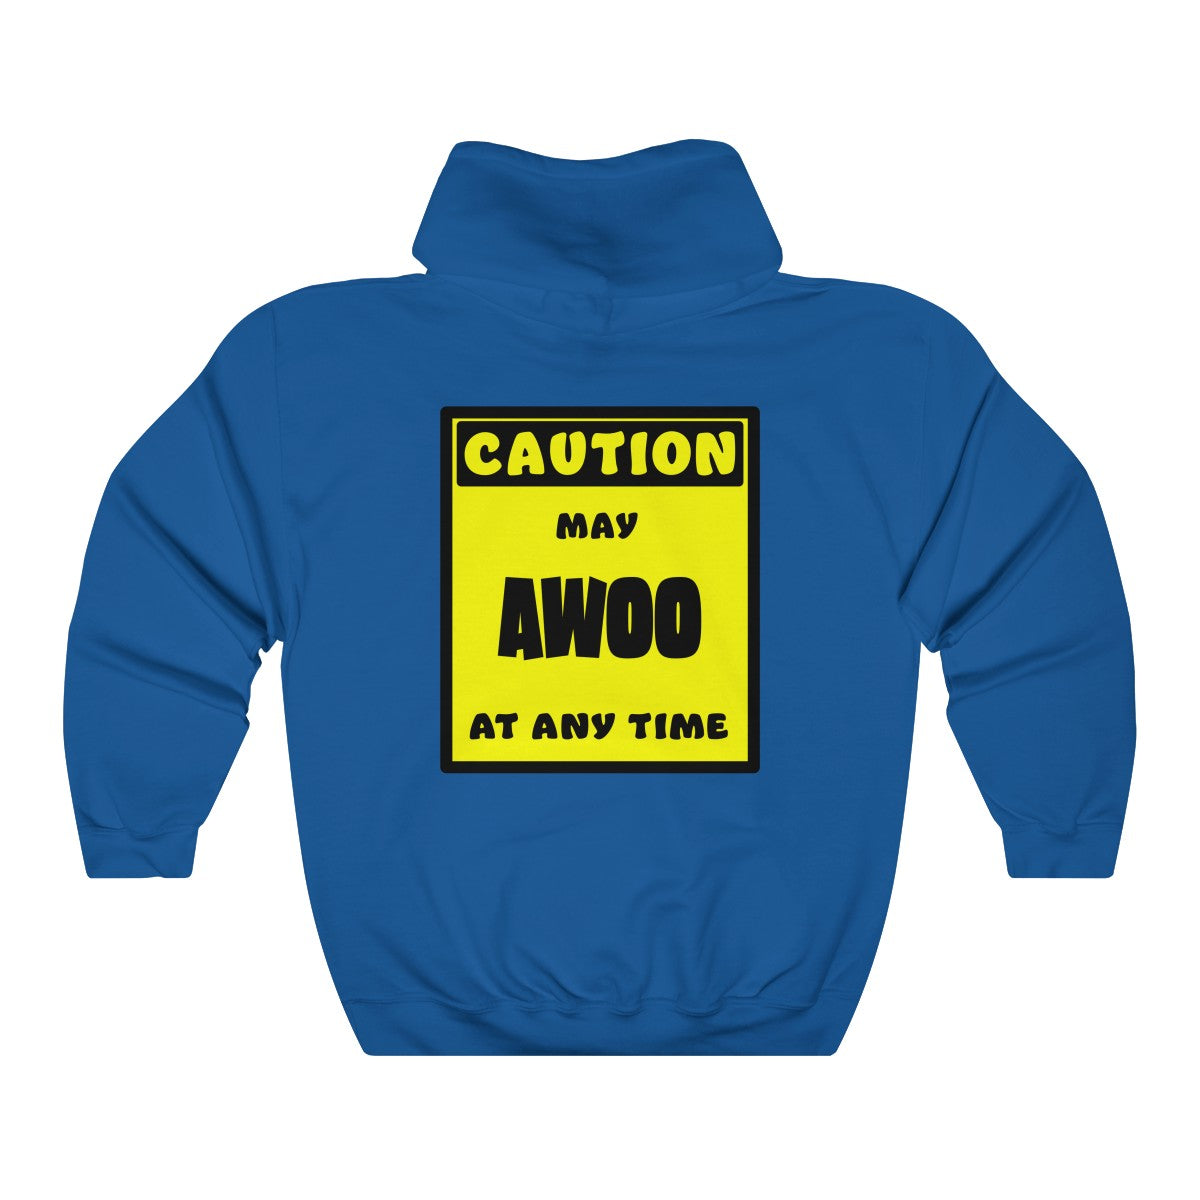 CAUTION! May AWOO at any time! - Hoodie Hoodie AFLT-Whootorca Royal Blue S 